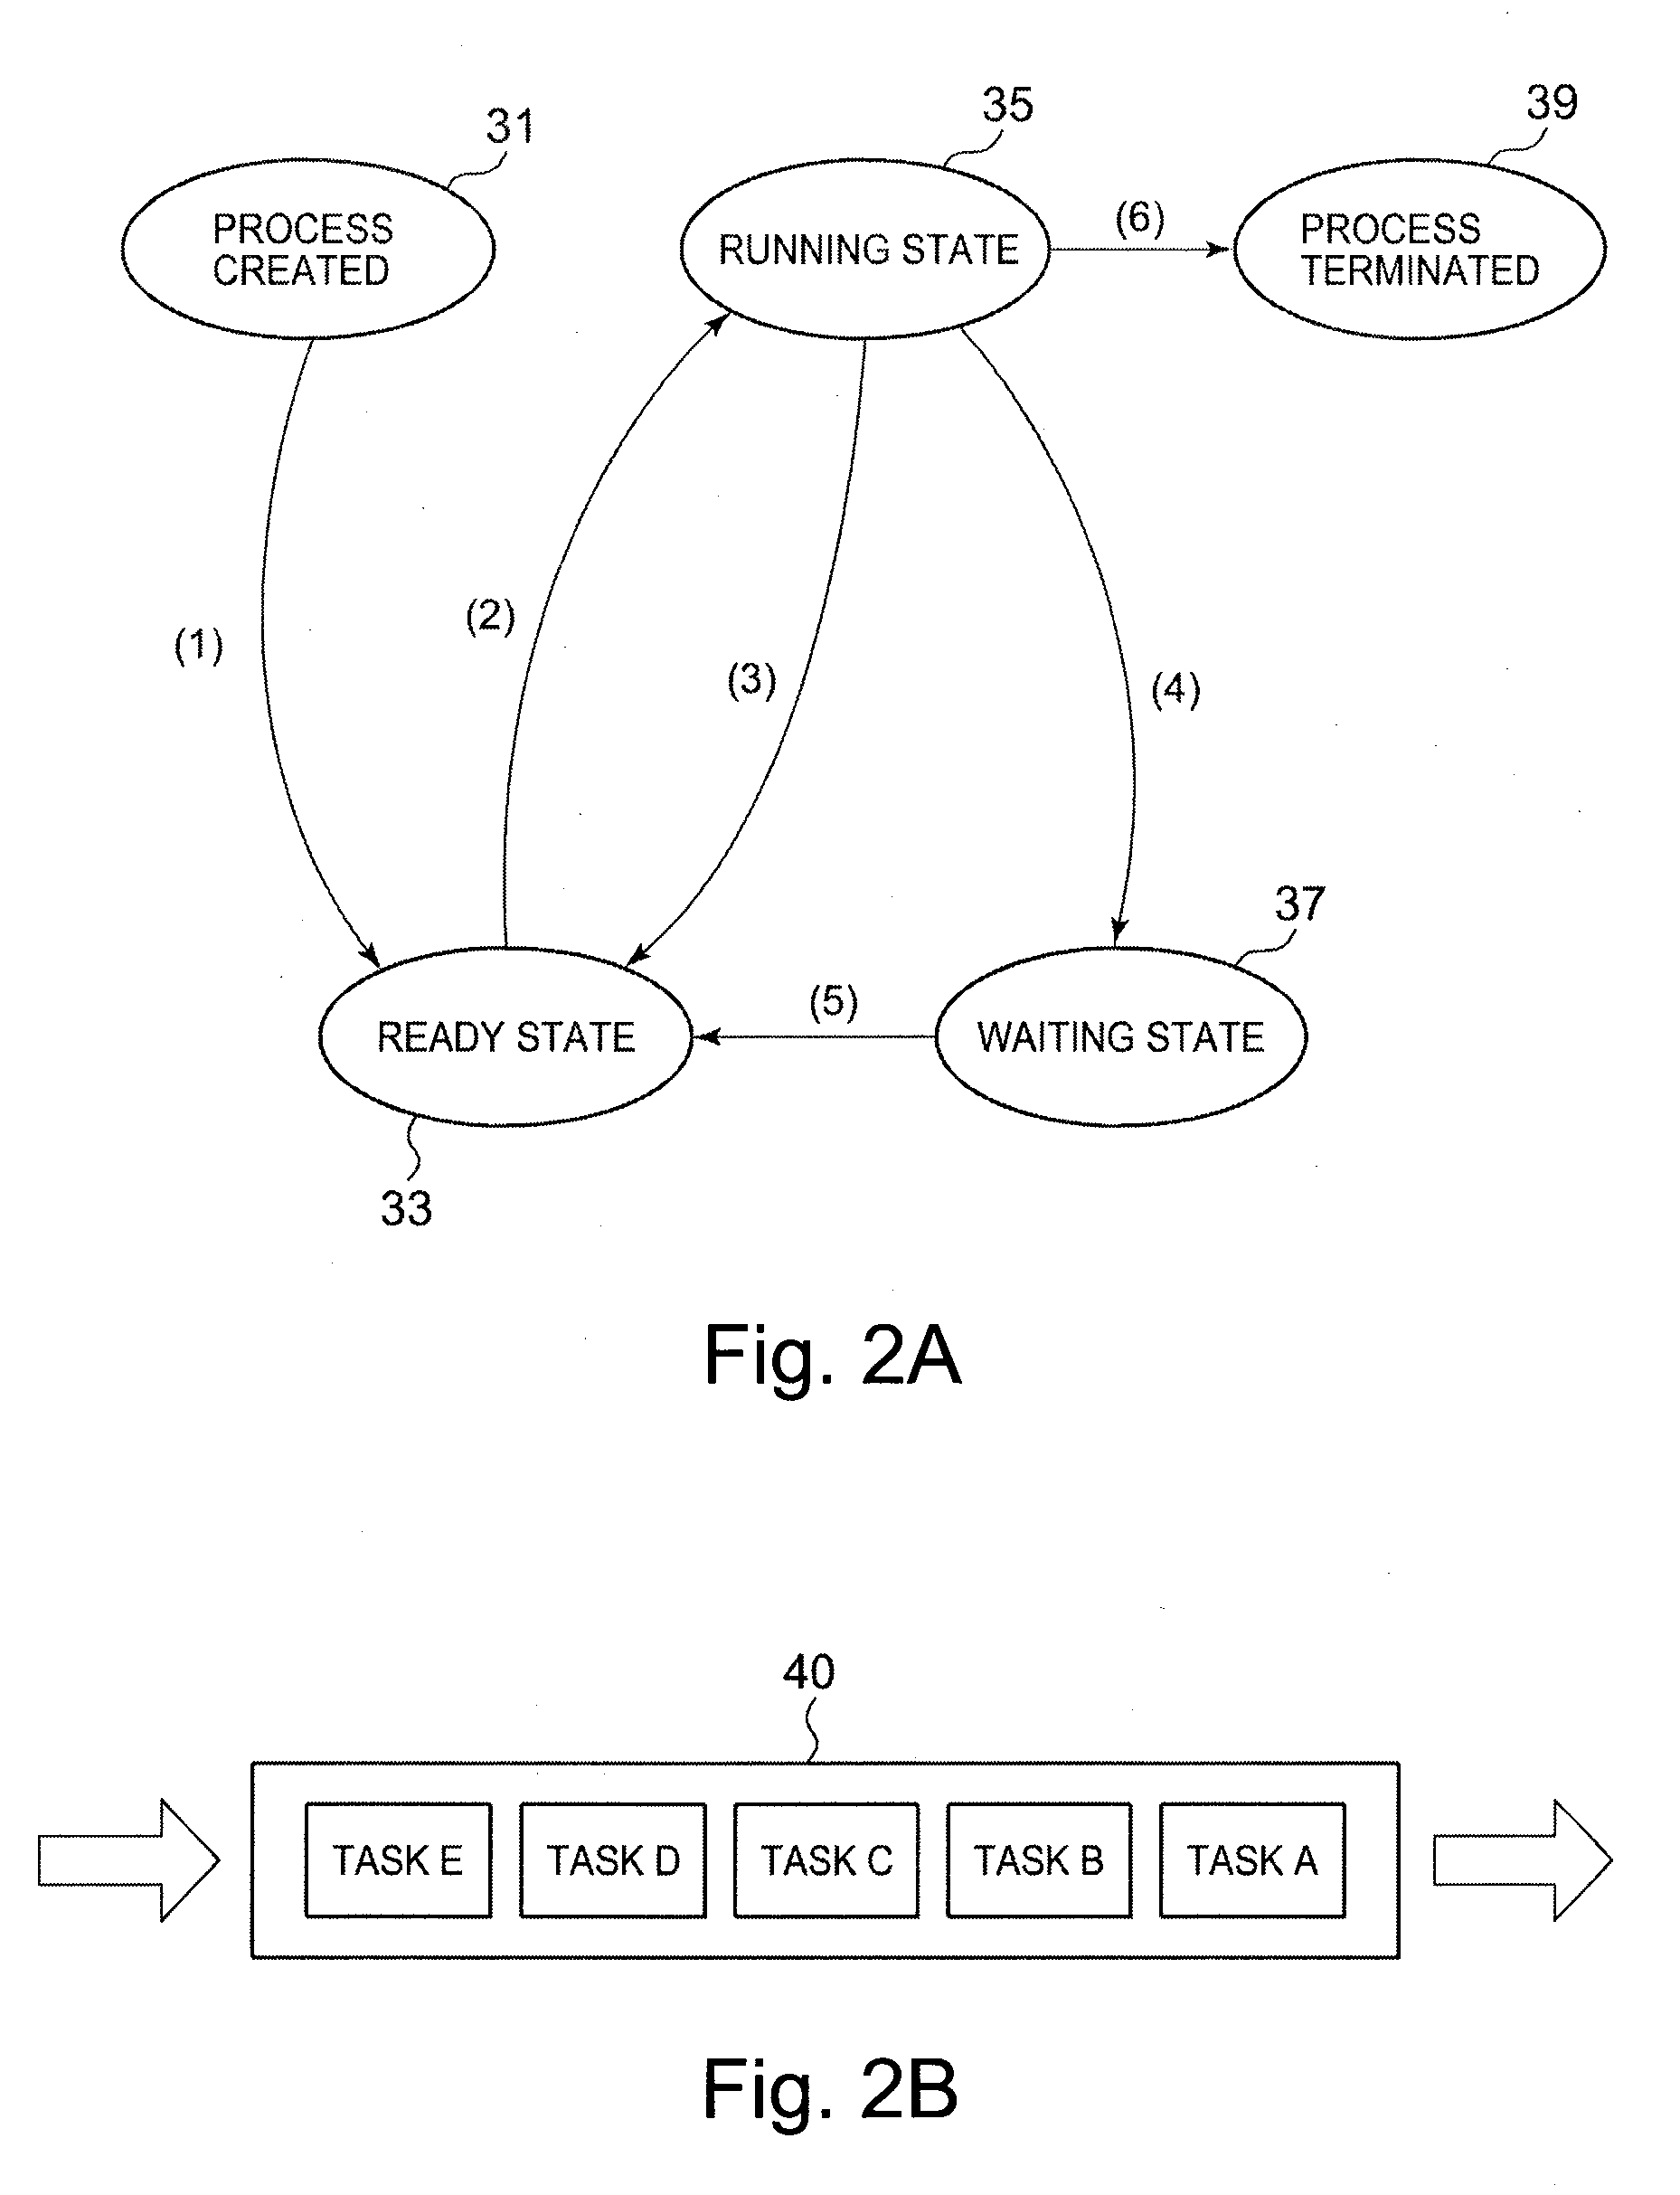 System and methods for booting electronic devices